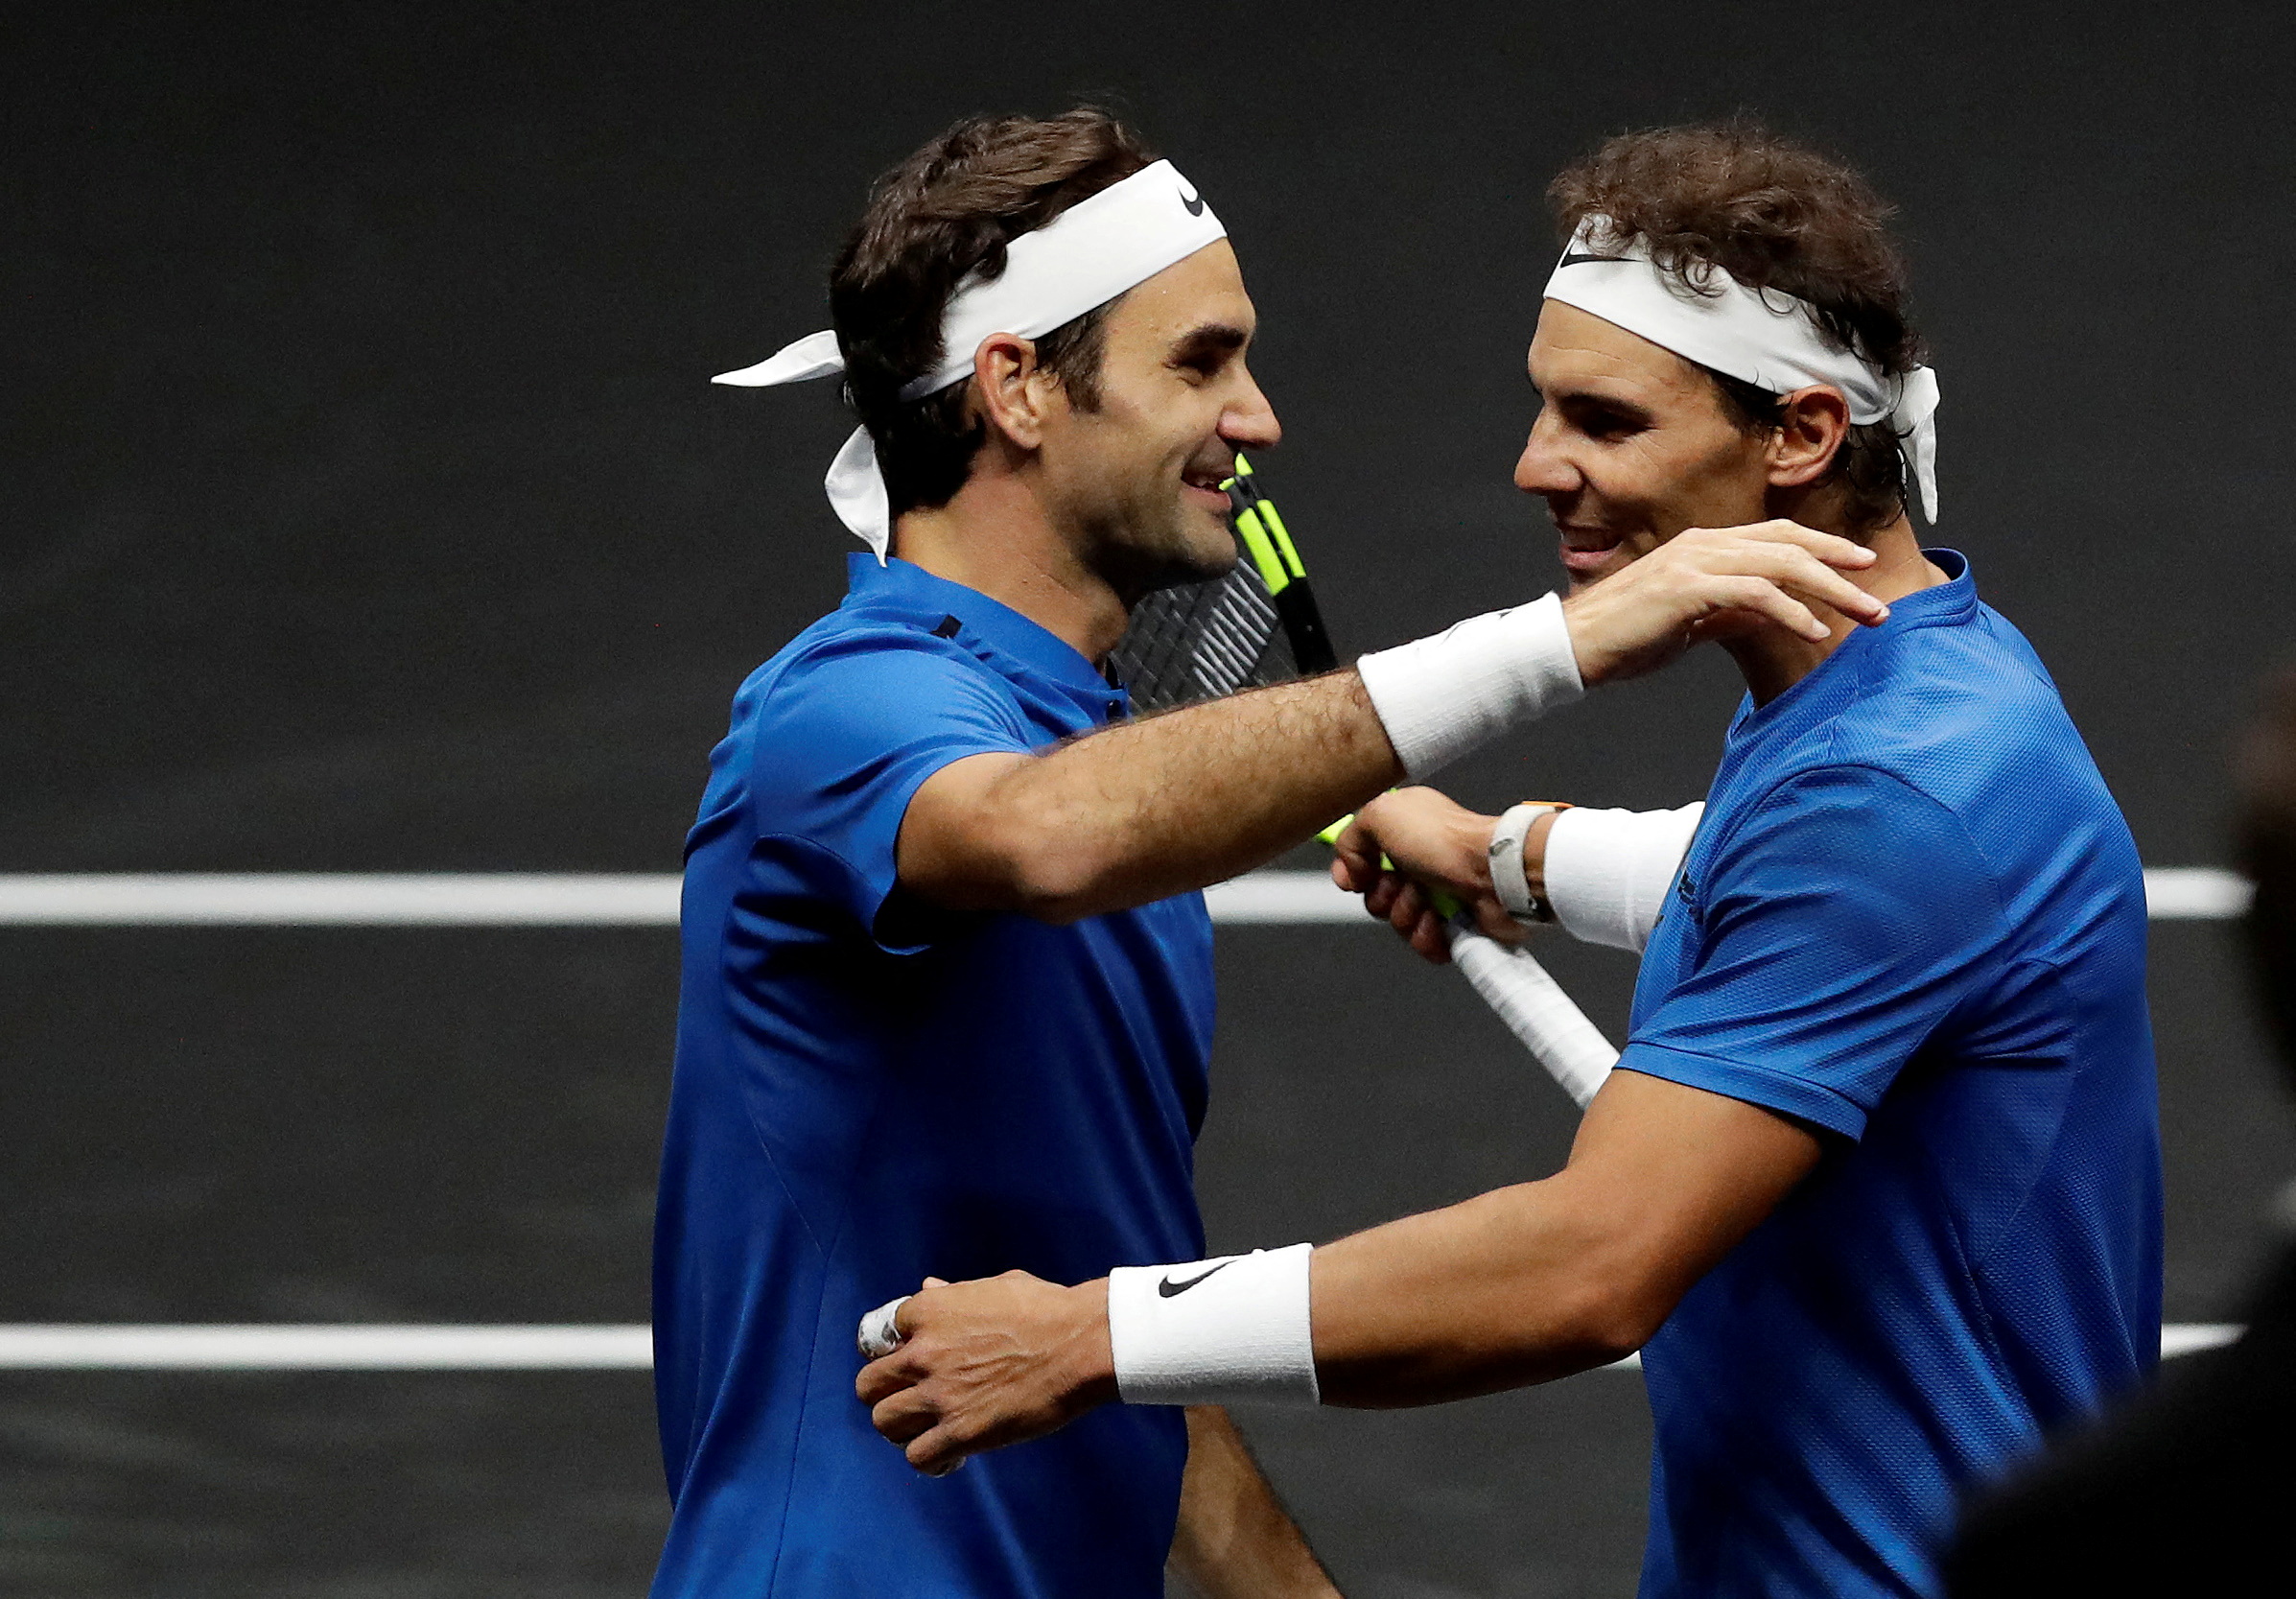 FILE PHOTO: Tennis - Laver Cup - 2nd Day - Prague, Czech Republic - September 23, 2017 - Rafael Nadal and Roger Federer of team Europe celebrate after winning the match. 